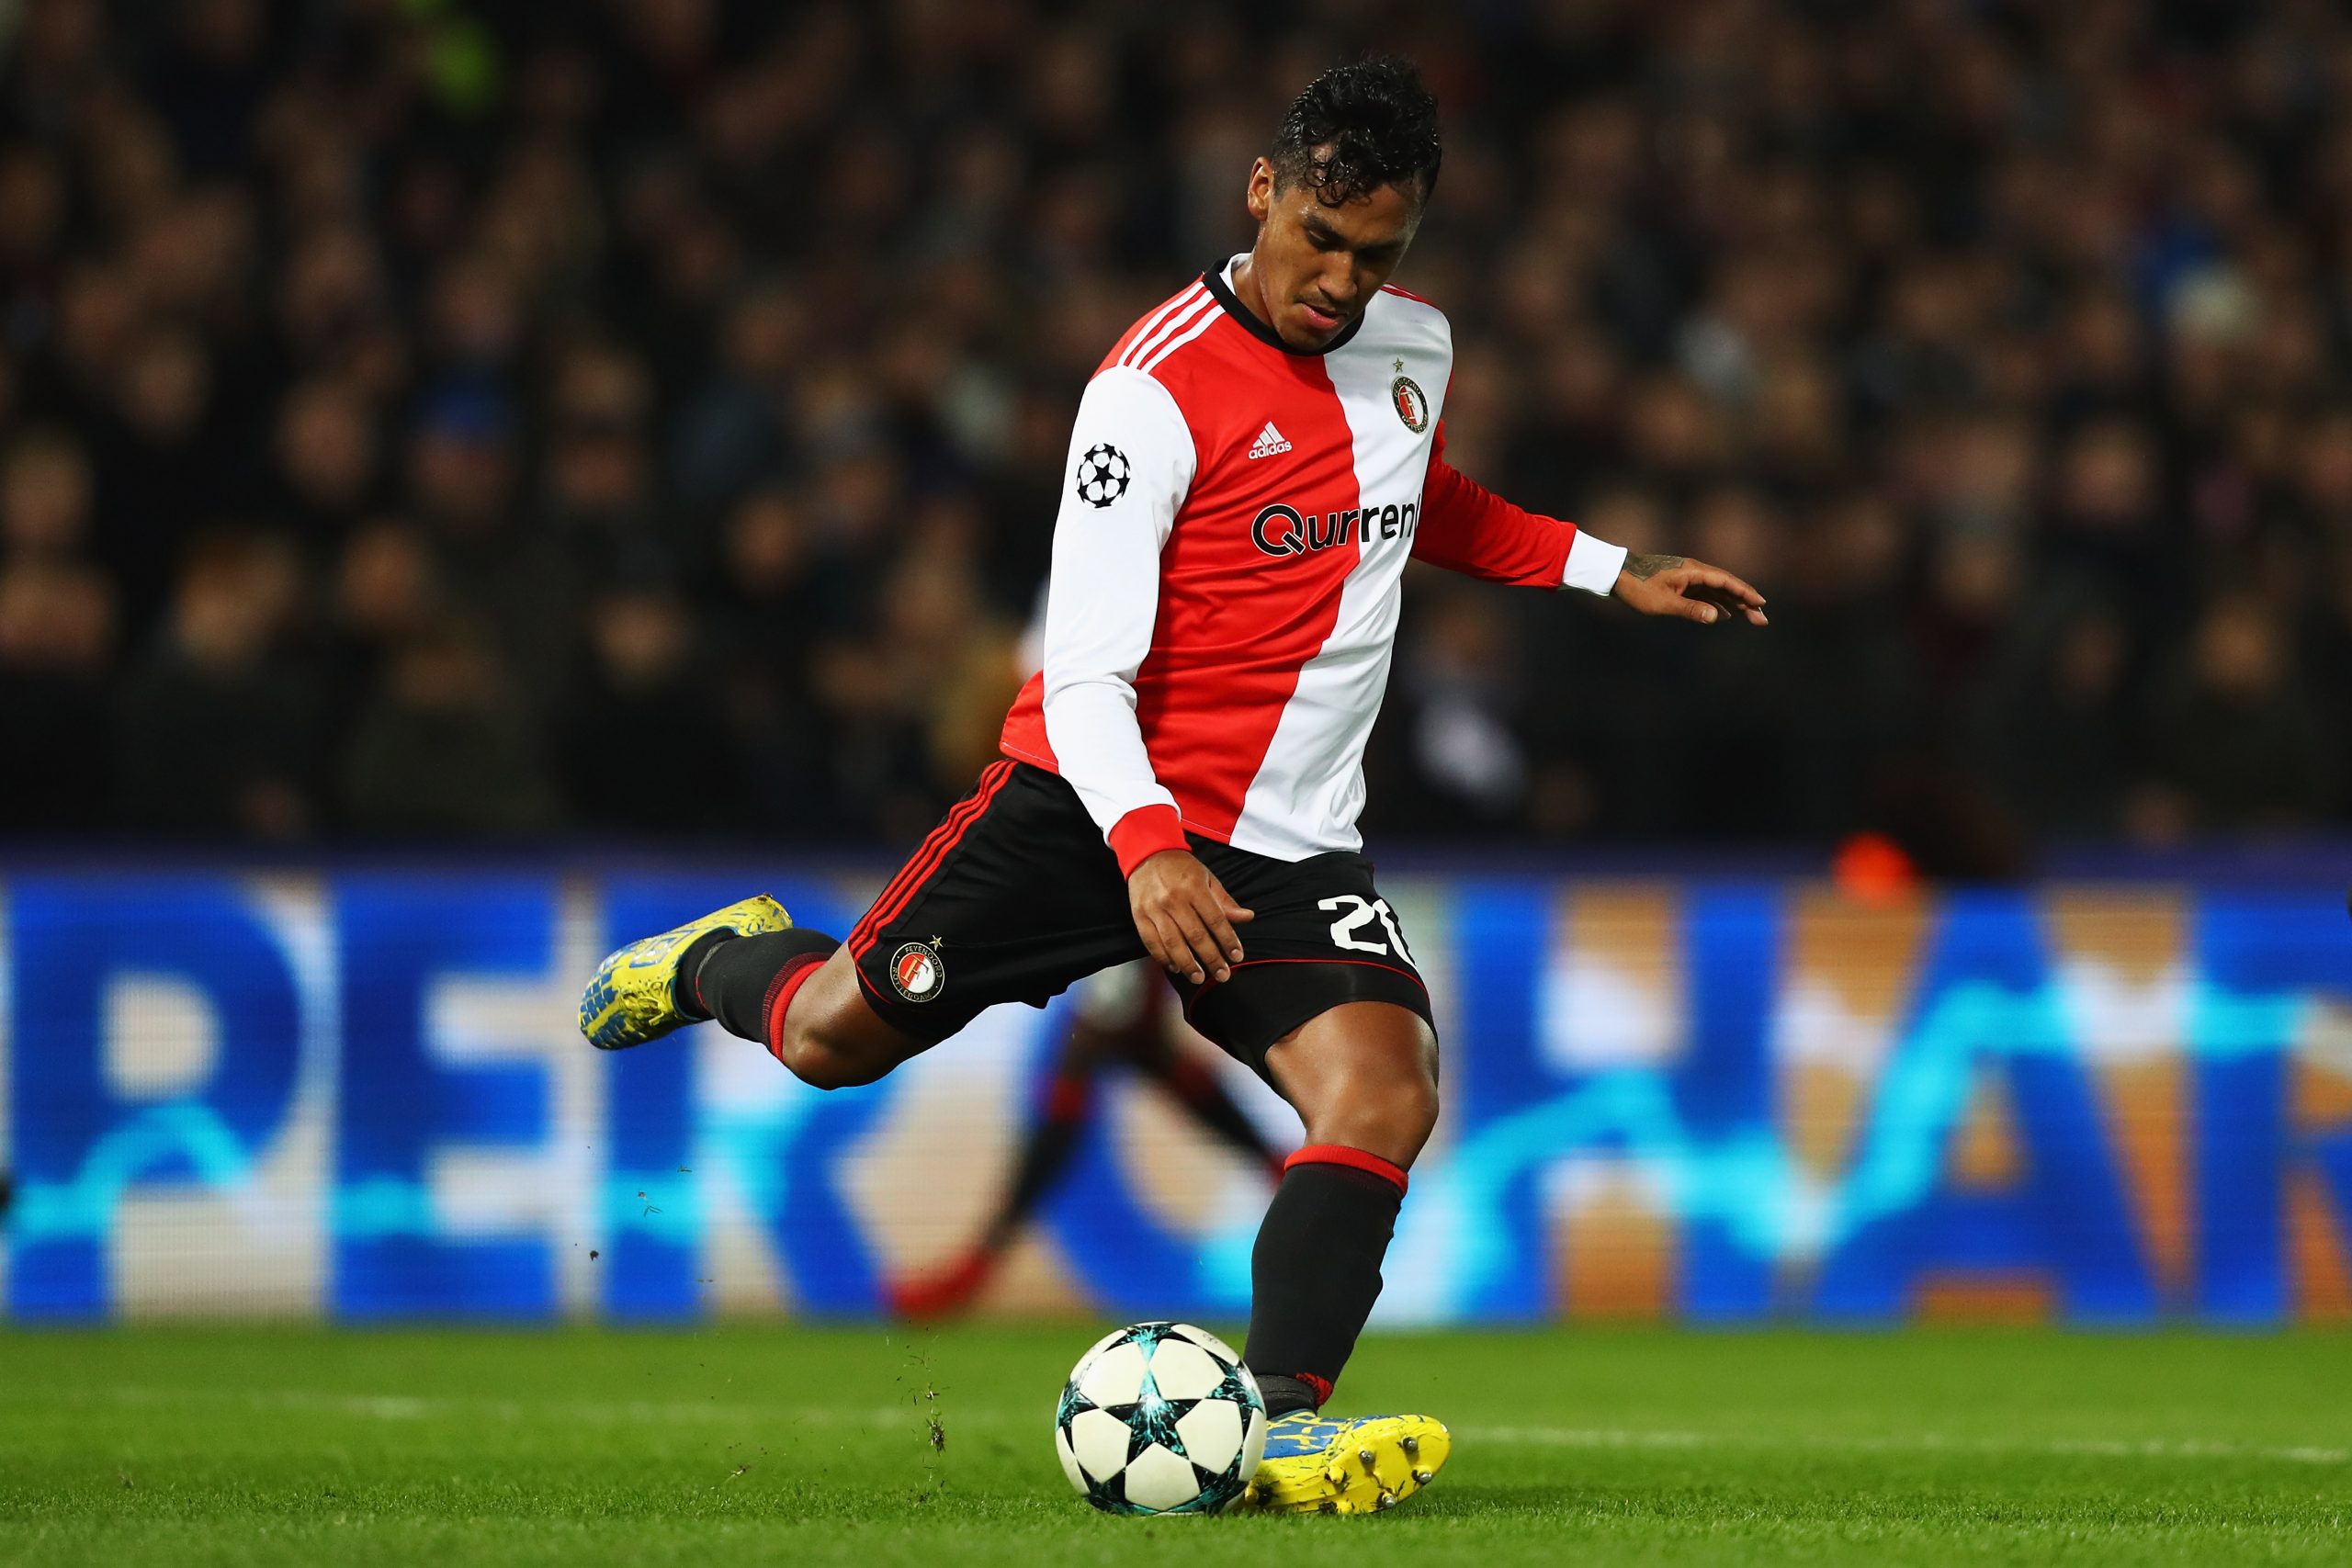 Renato Tapia of Feyenoord in action during the UEFA Champions League match back in 2017.